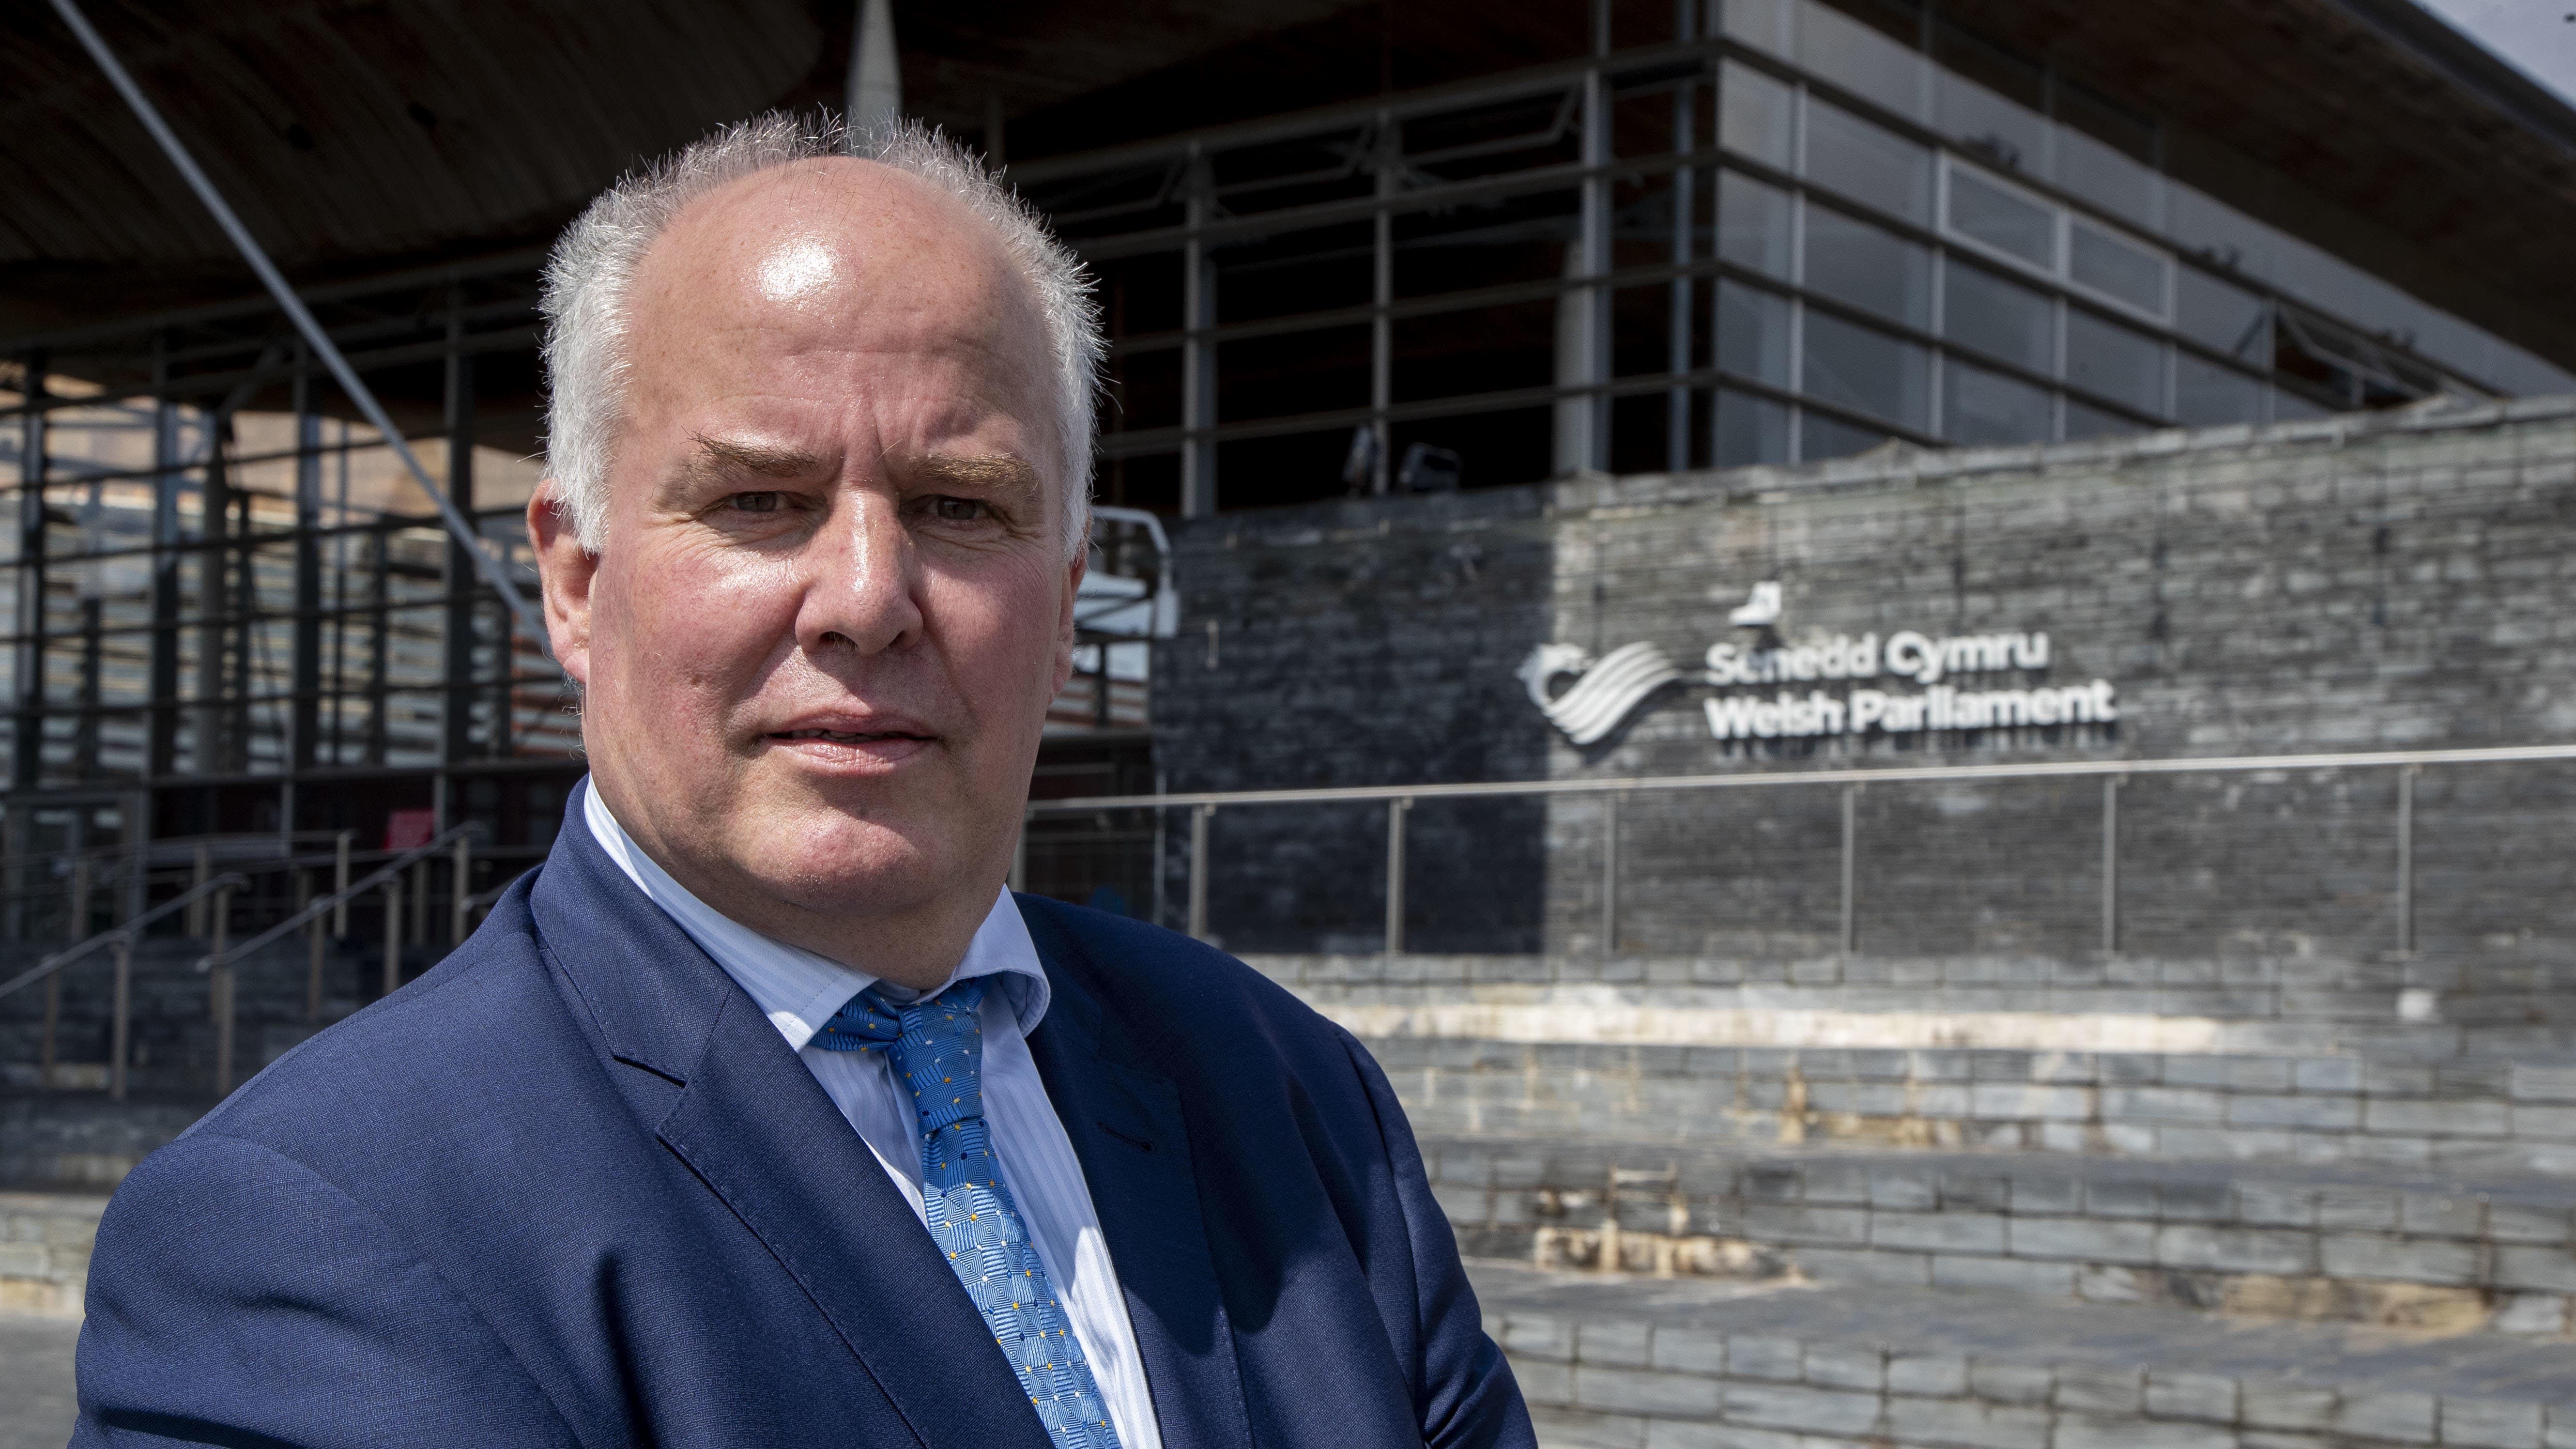 Calls for snap election in Wales ‘hot-headed’, says Tory leader